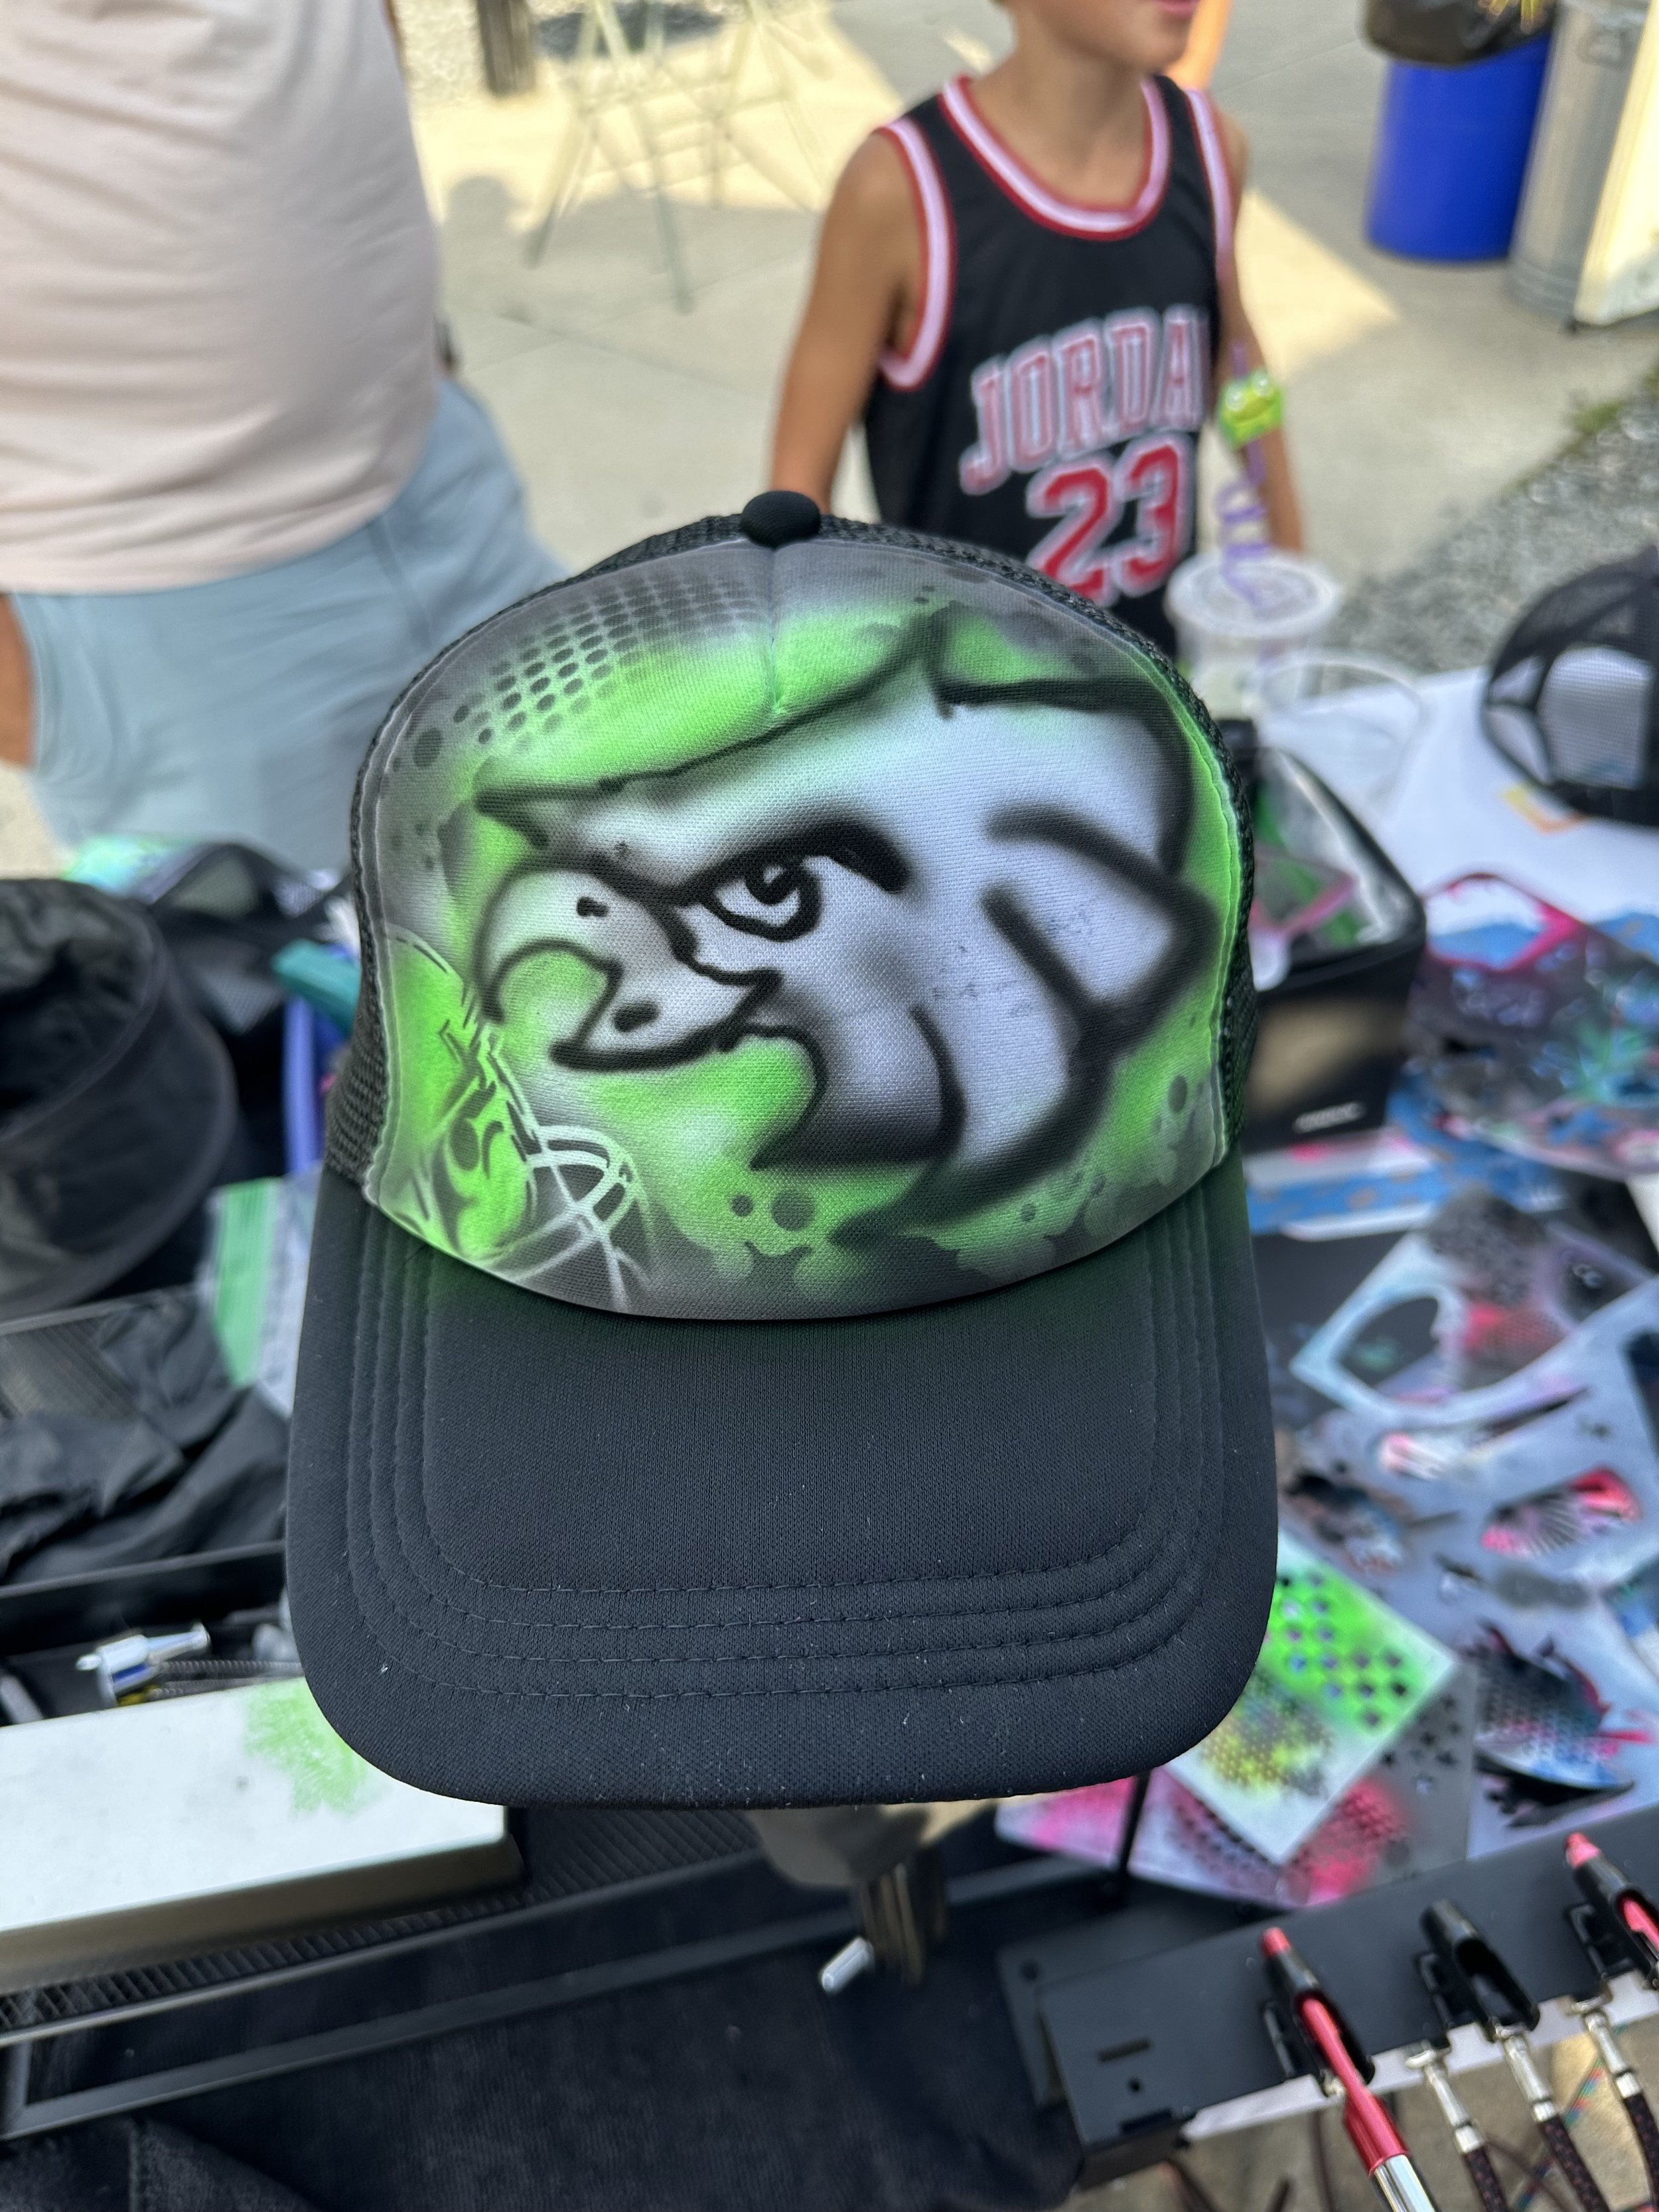 Custom Airbrush Hats for Party Events Eagles NFL.jpg